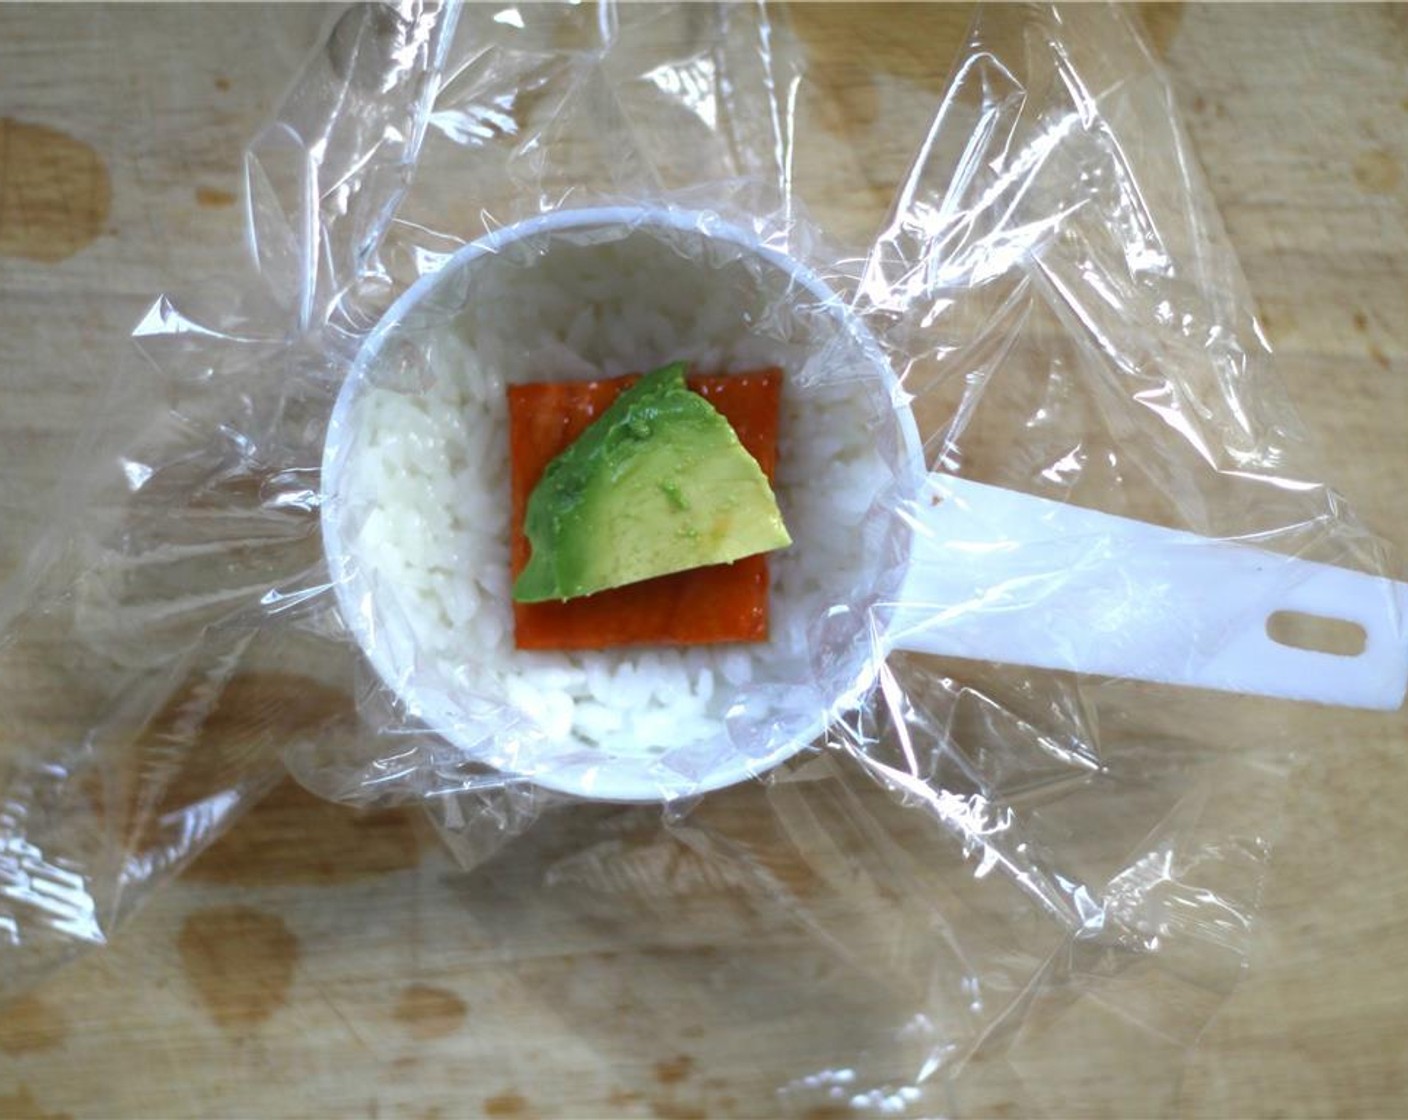 step 11 LIne a measuring cup with plastic wrap for easy removal. With wet hands, press about 2 tbsp. of rice into the mold. Layer in a piece of sweet potato dipped in the remaining teriyaki sauce, along with a piece of avocado.